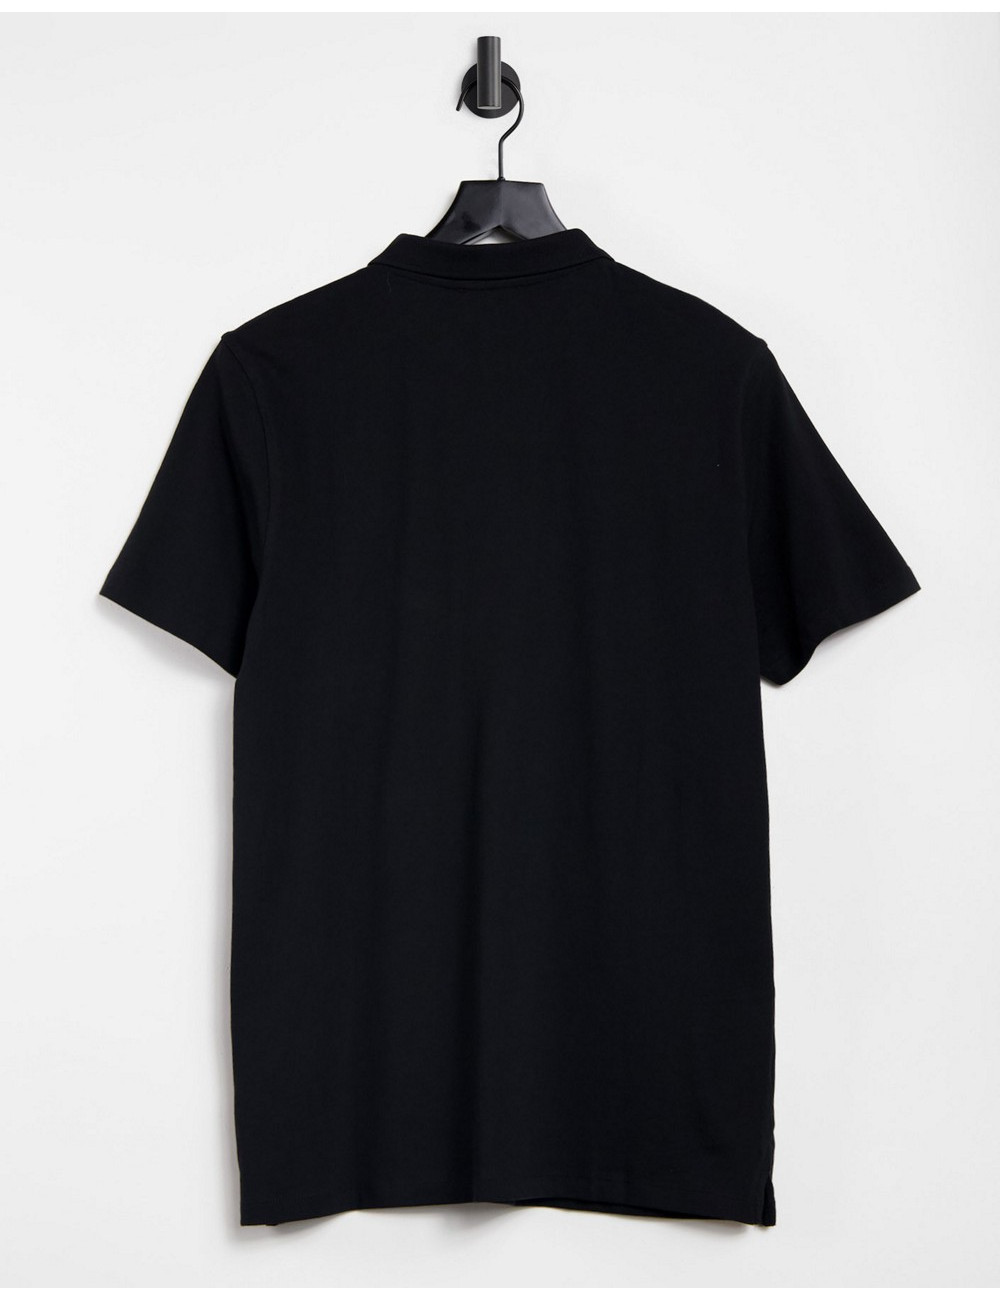 New Look jersey polo in black